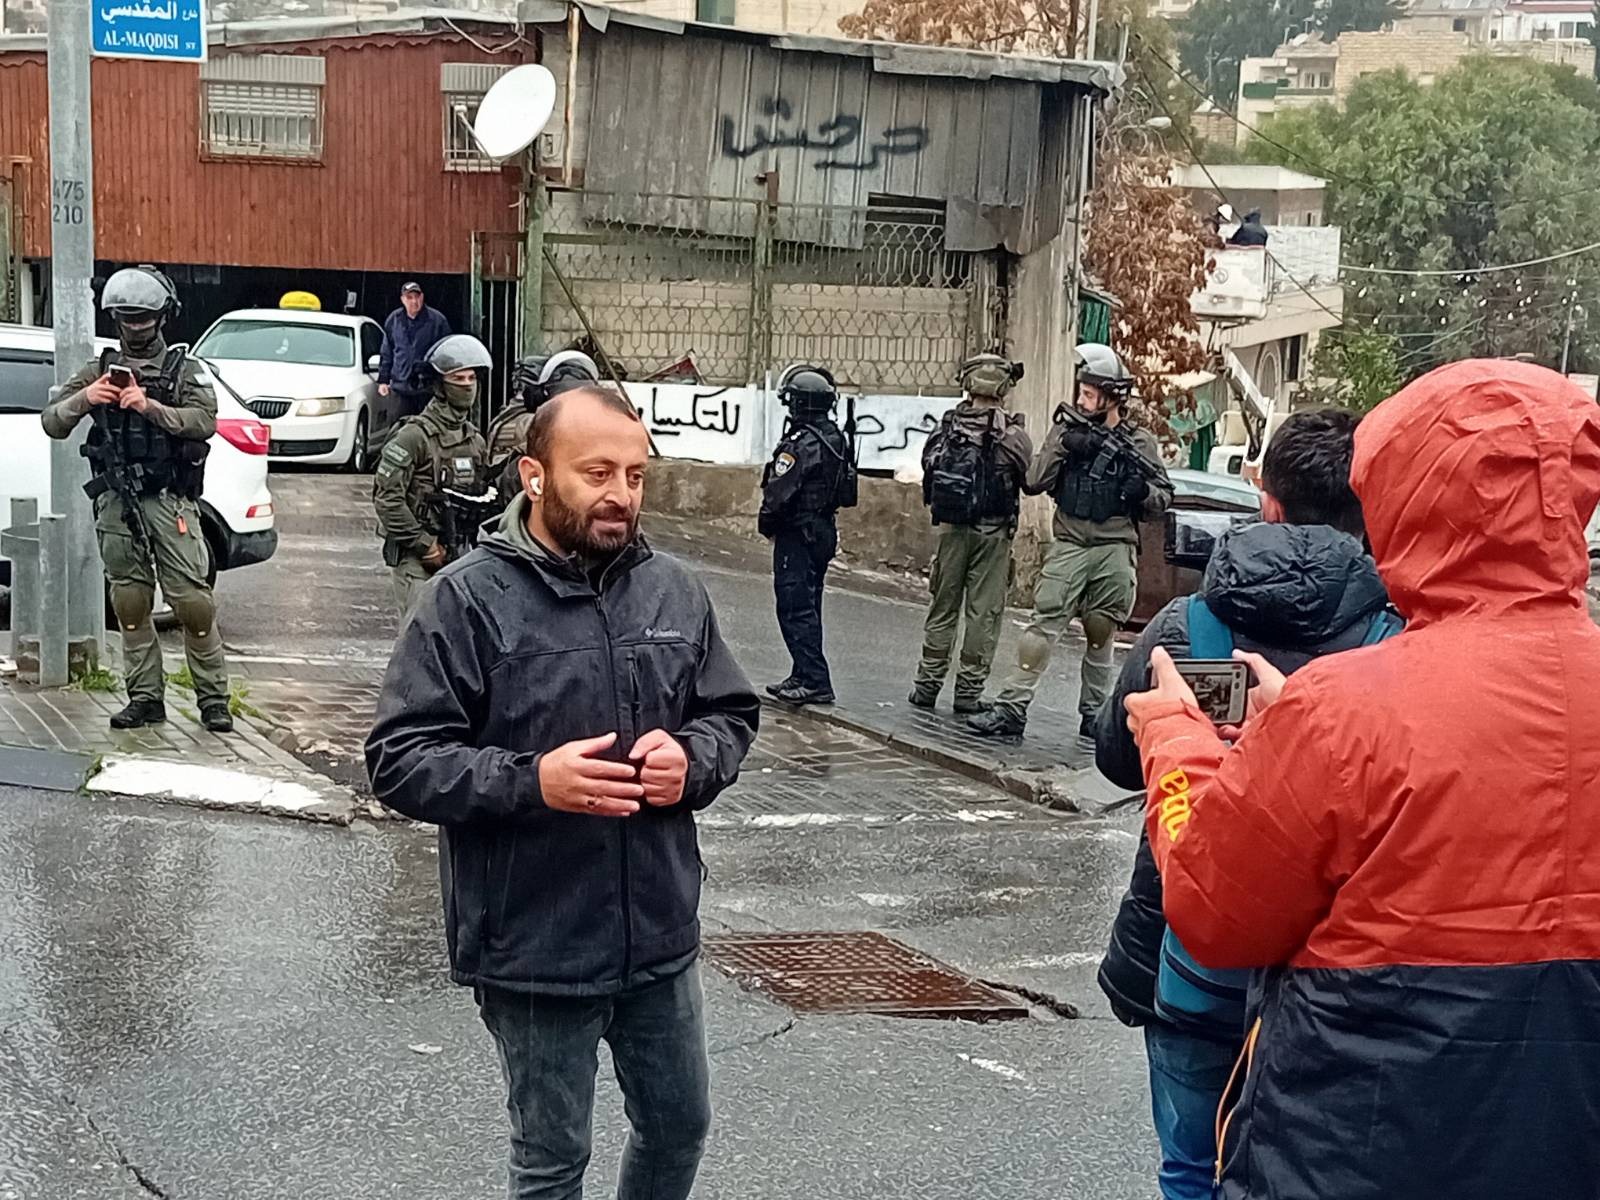 In the forefront, three people, one visibly filming, are standing in the street. In front of them, a line of six IOF soldiers are standing on the road. Cars are parked in the background.